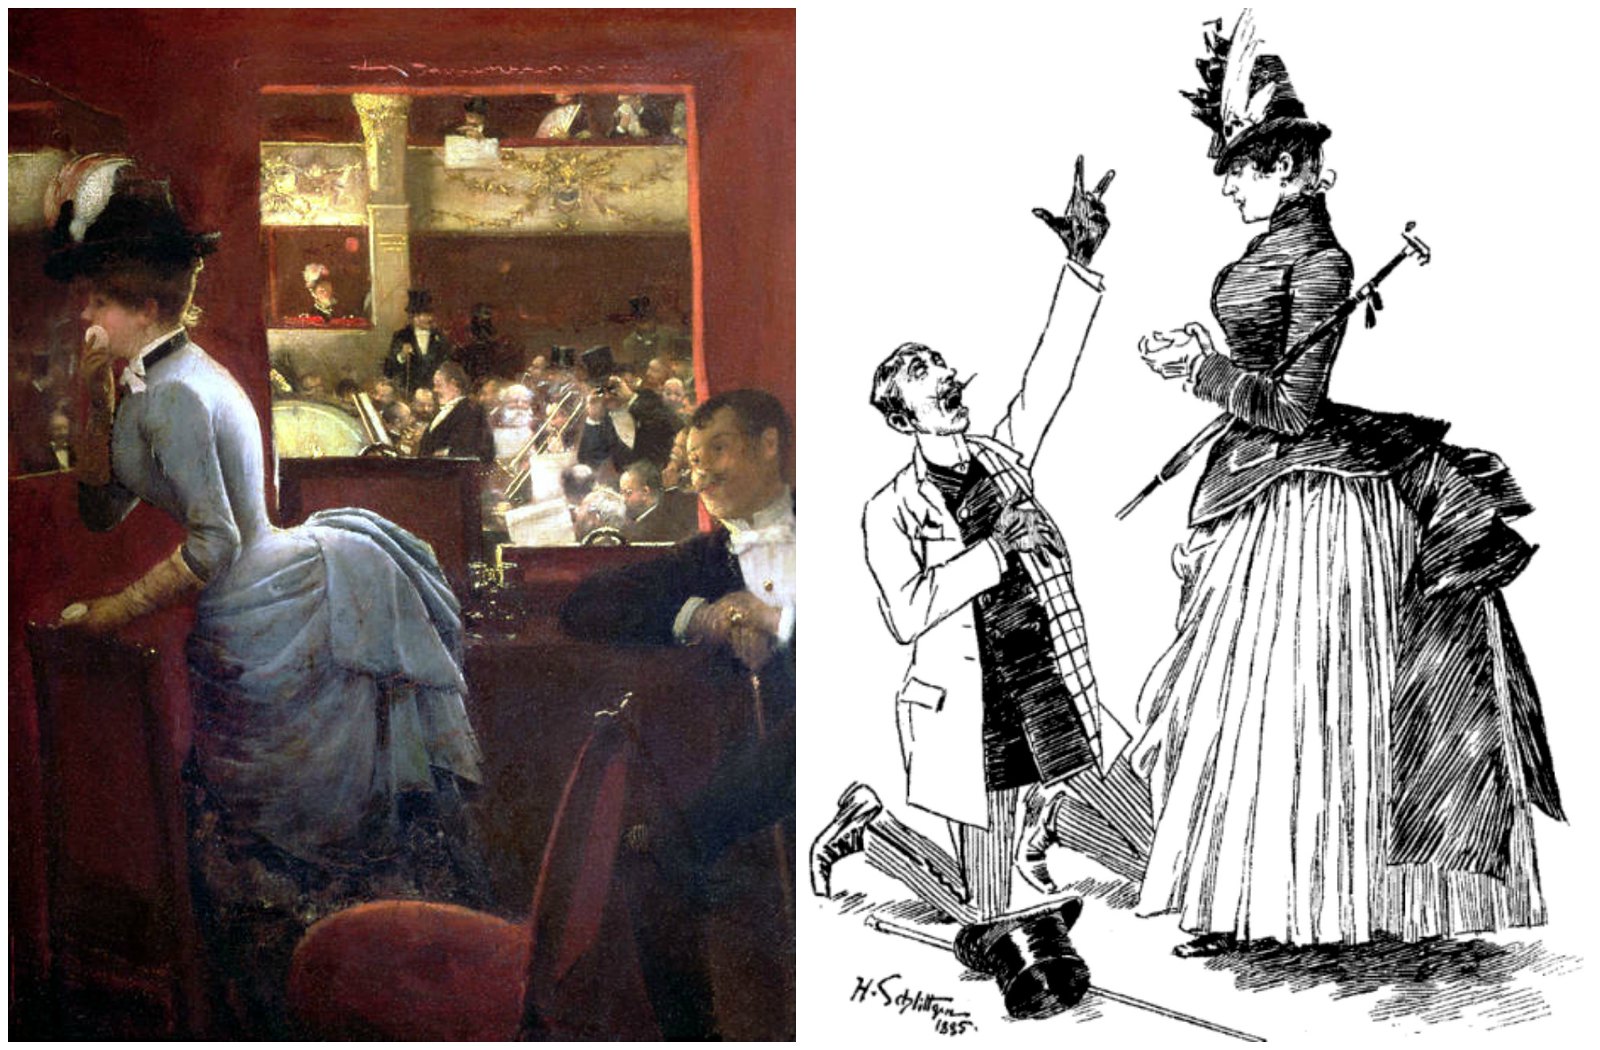 Left: The Box by the Stalls by Jean-Georges Béraud - 1883. Right: An 1885 proposal caricature